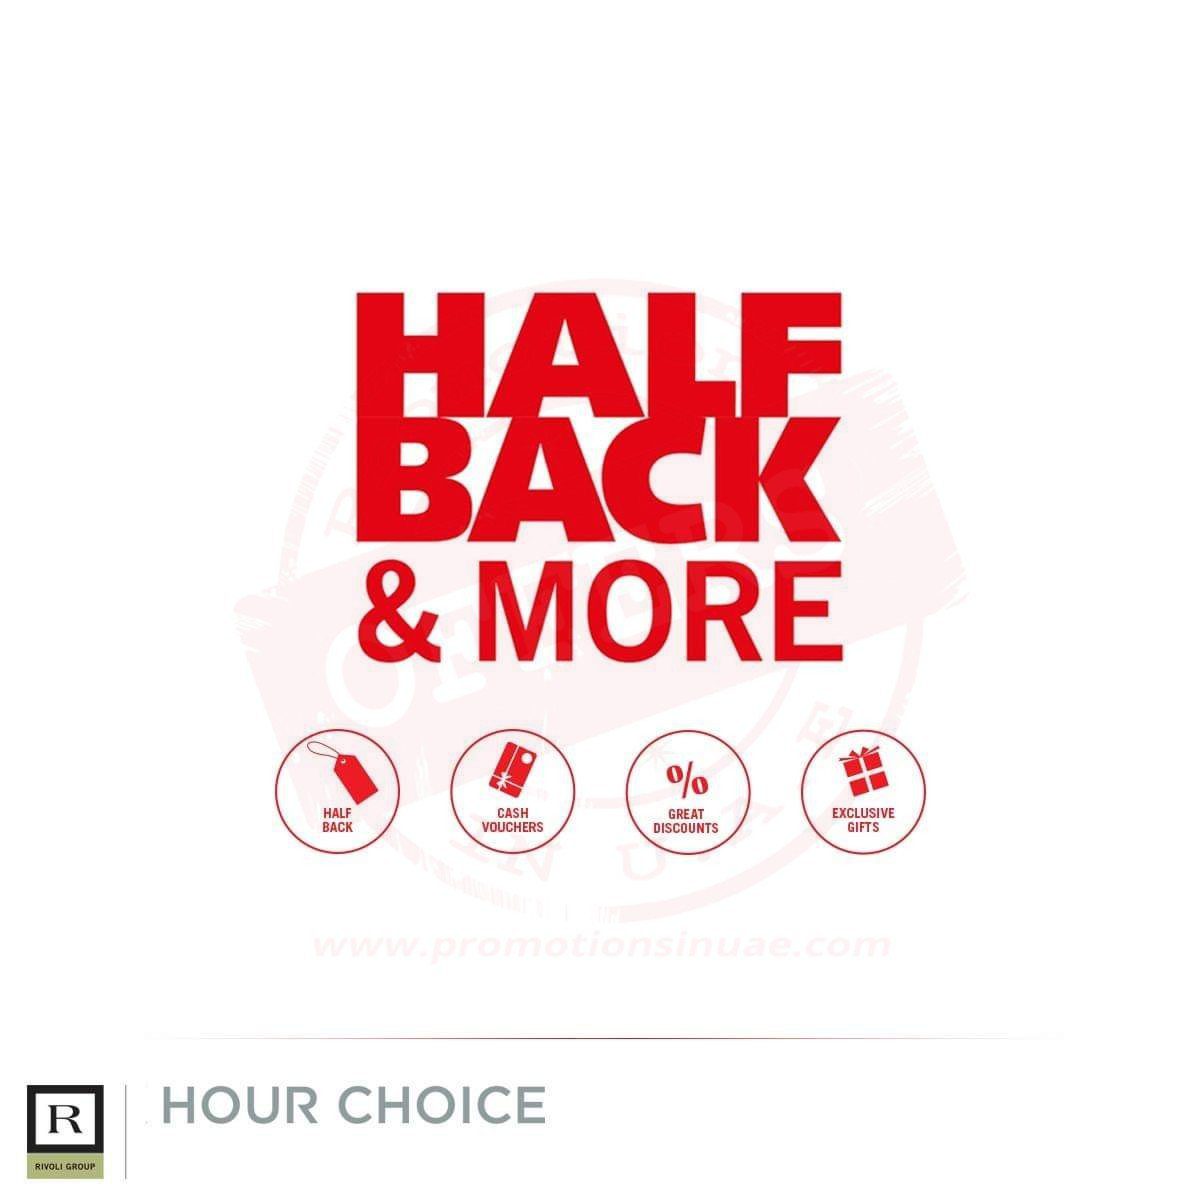 Receive half the value back at Hour Choice